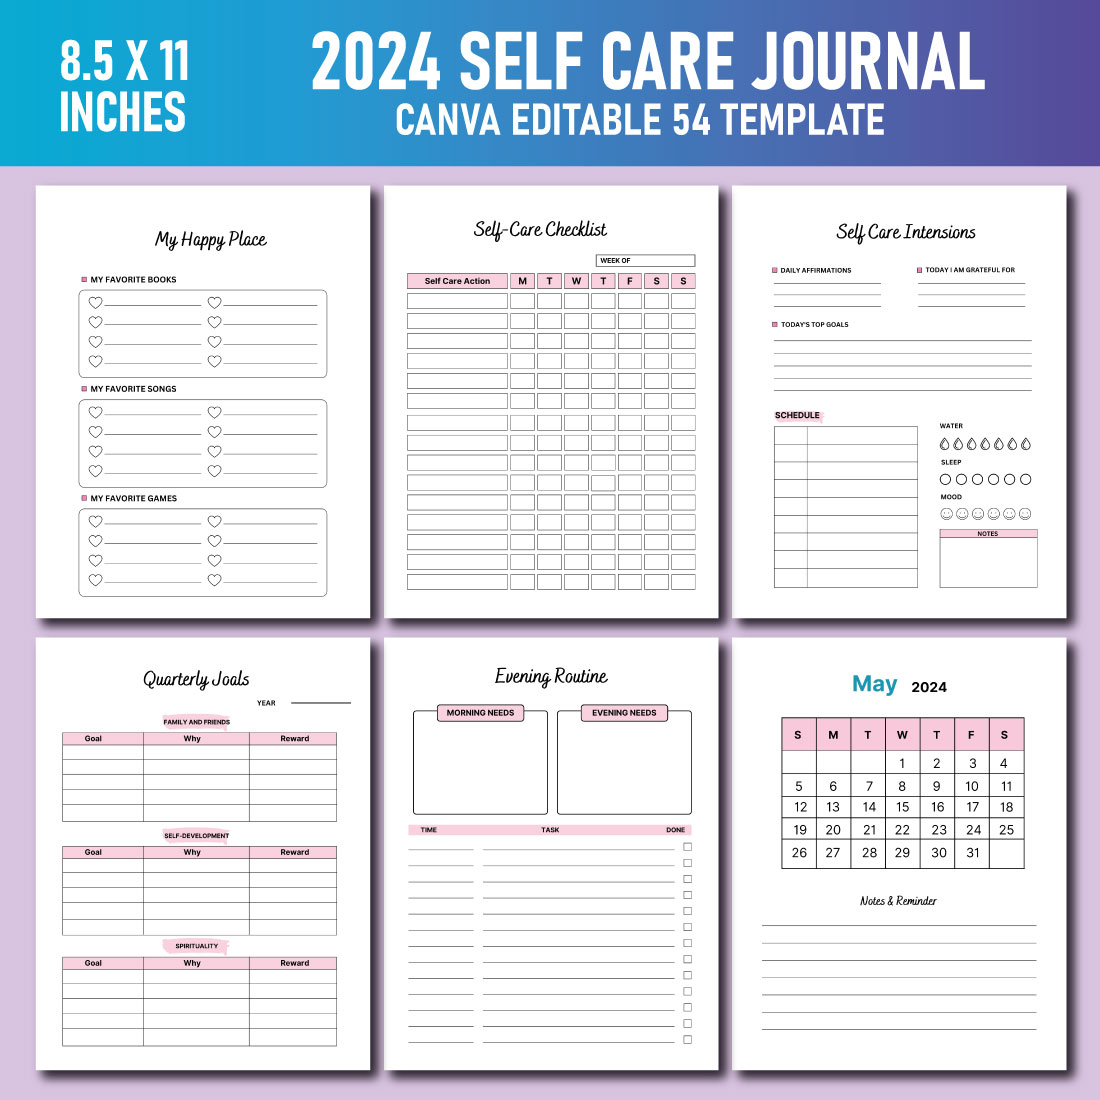 2024 Self Care Journal KDP Interiors Templates preview image.